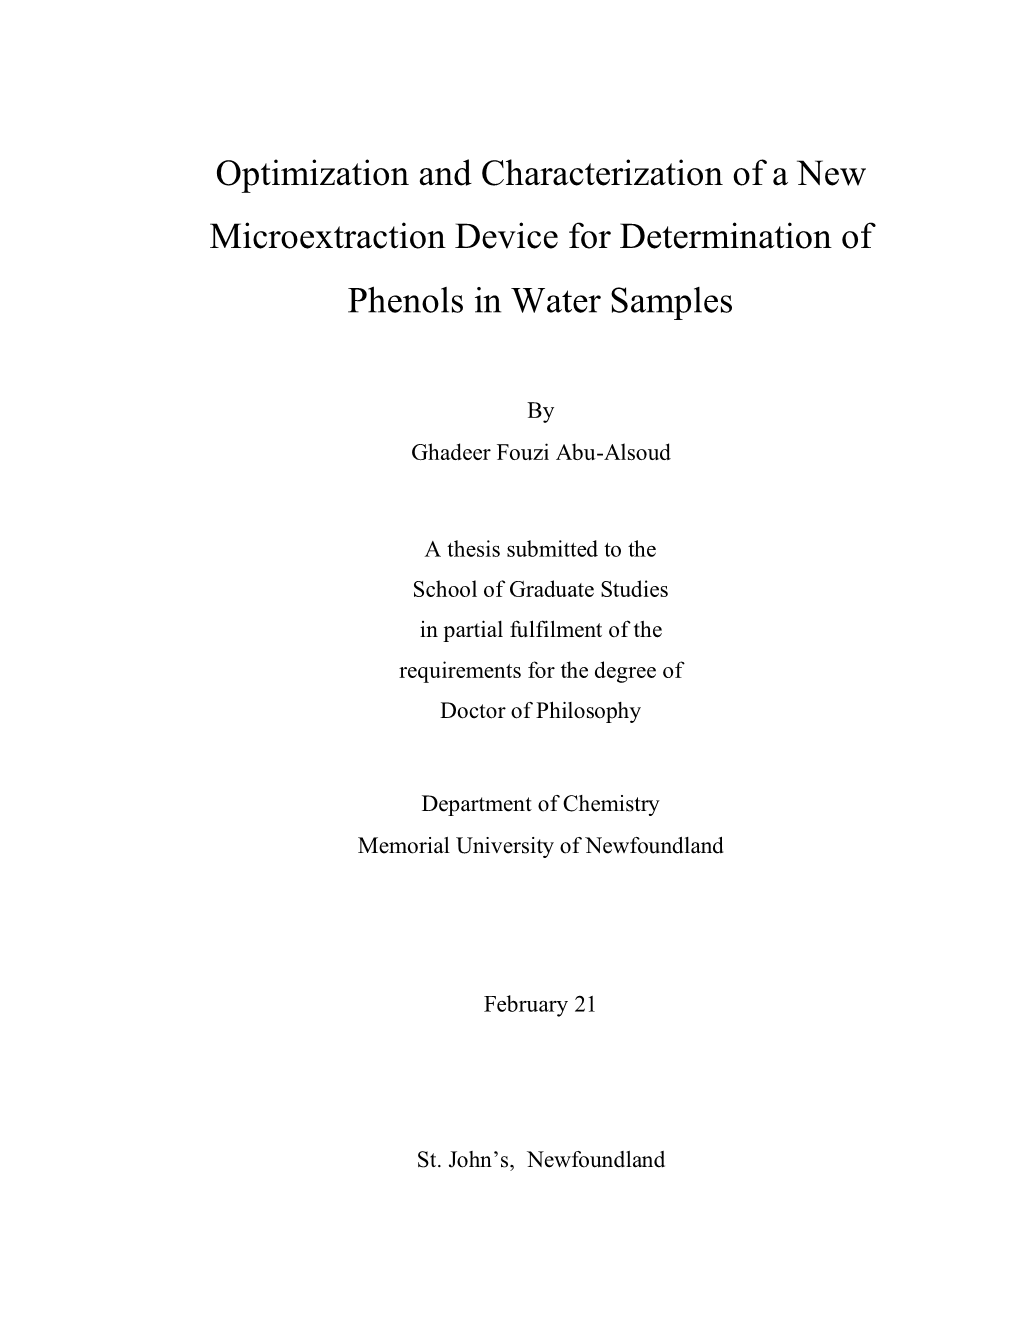 Optimization and Characterization of a New Microextraction Device for Determination of Phenols in Water Samples